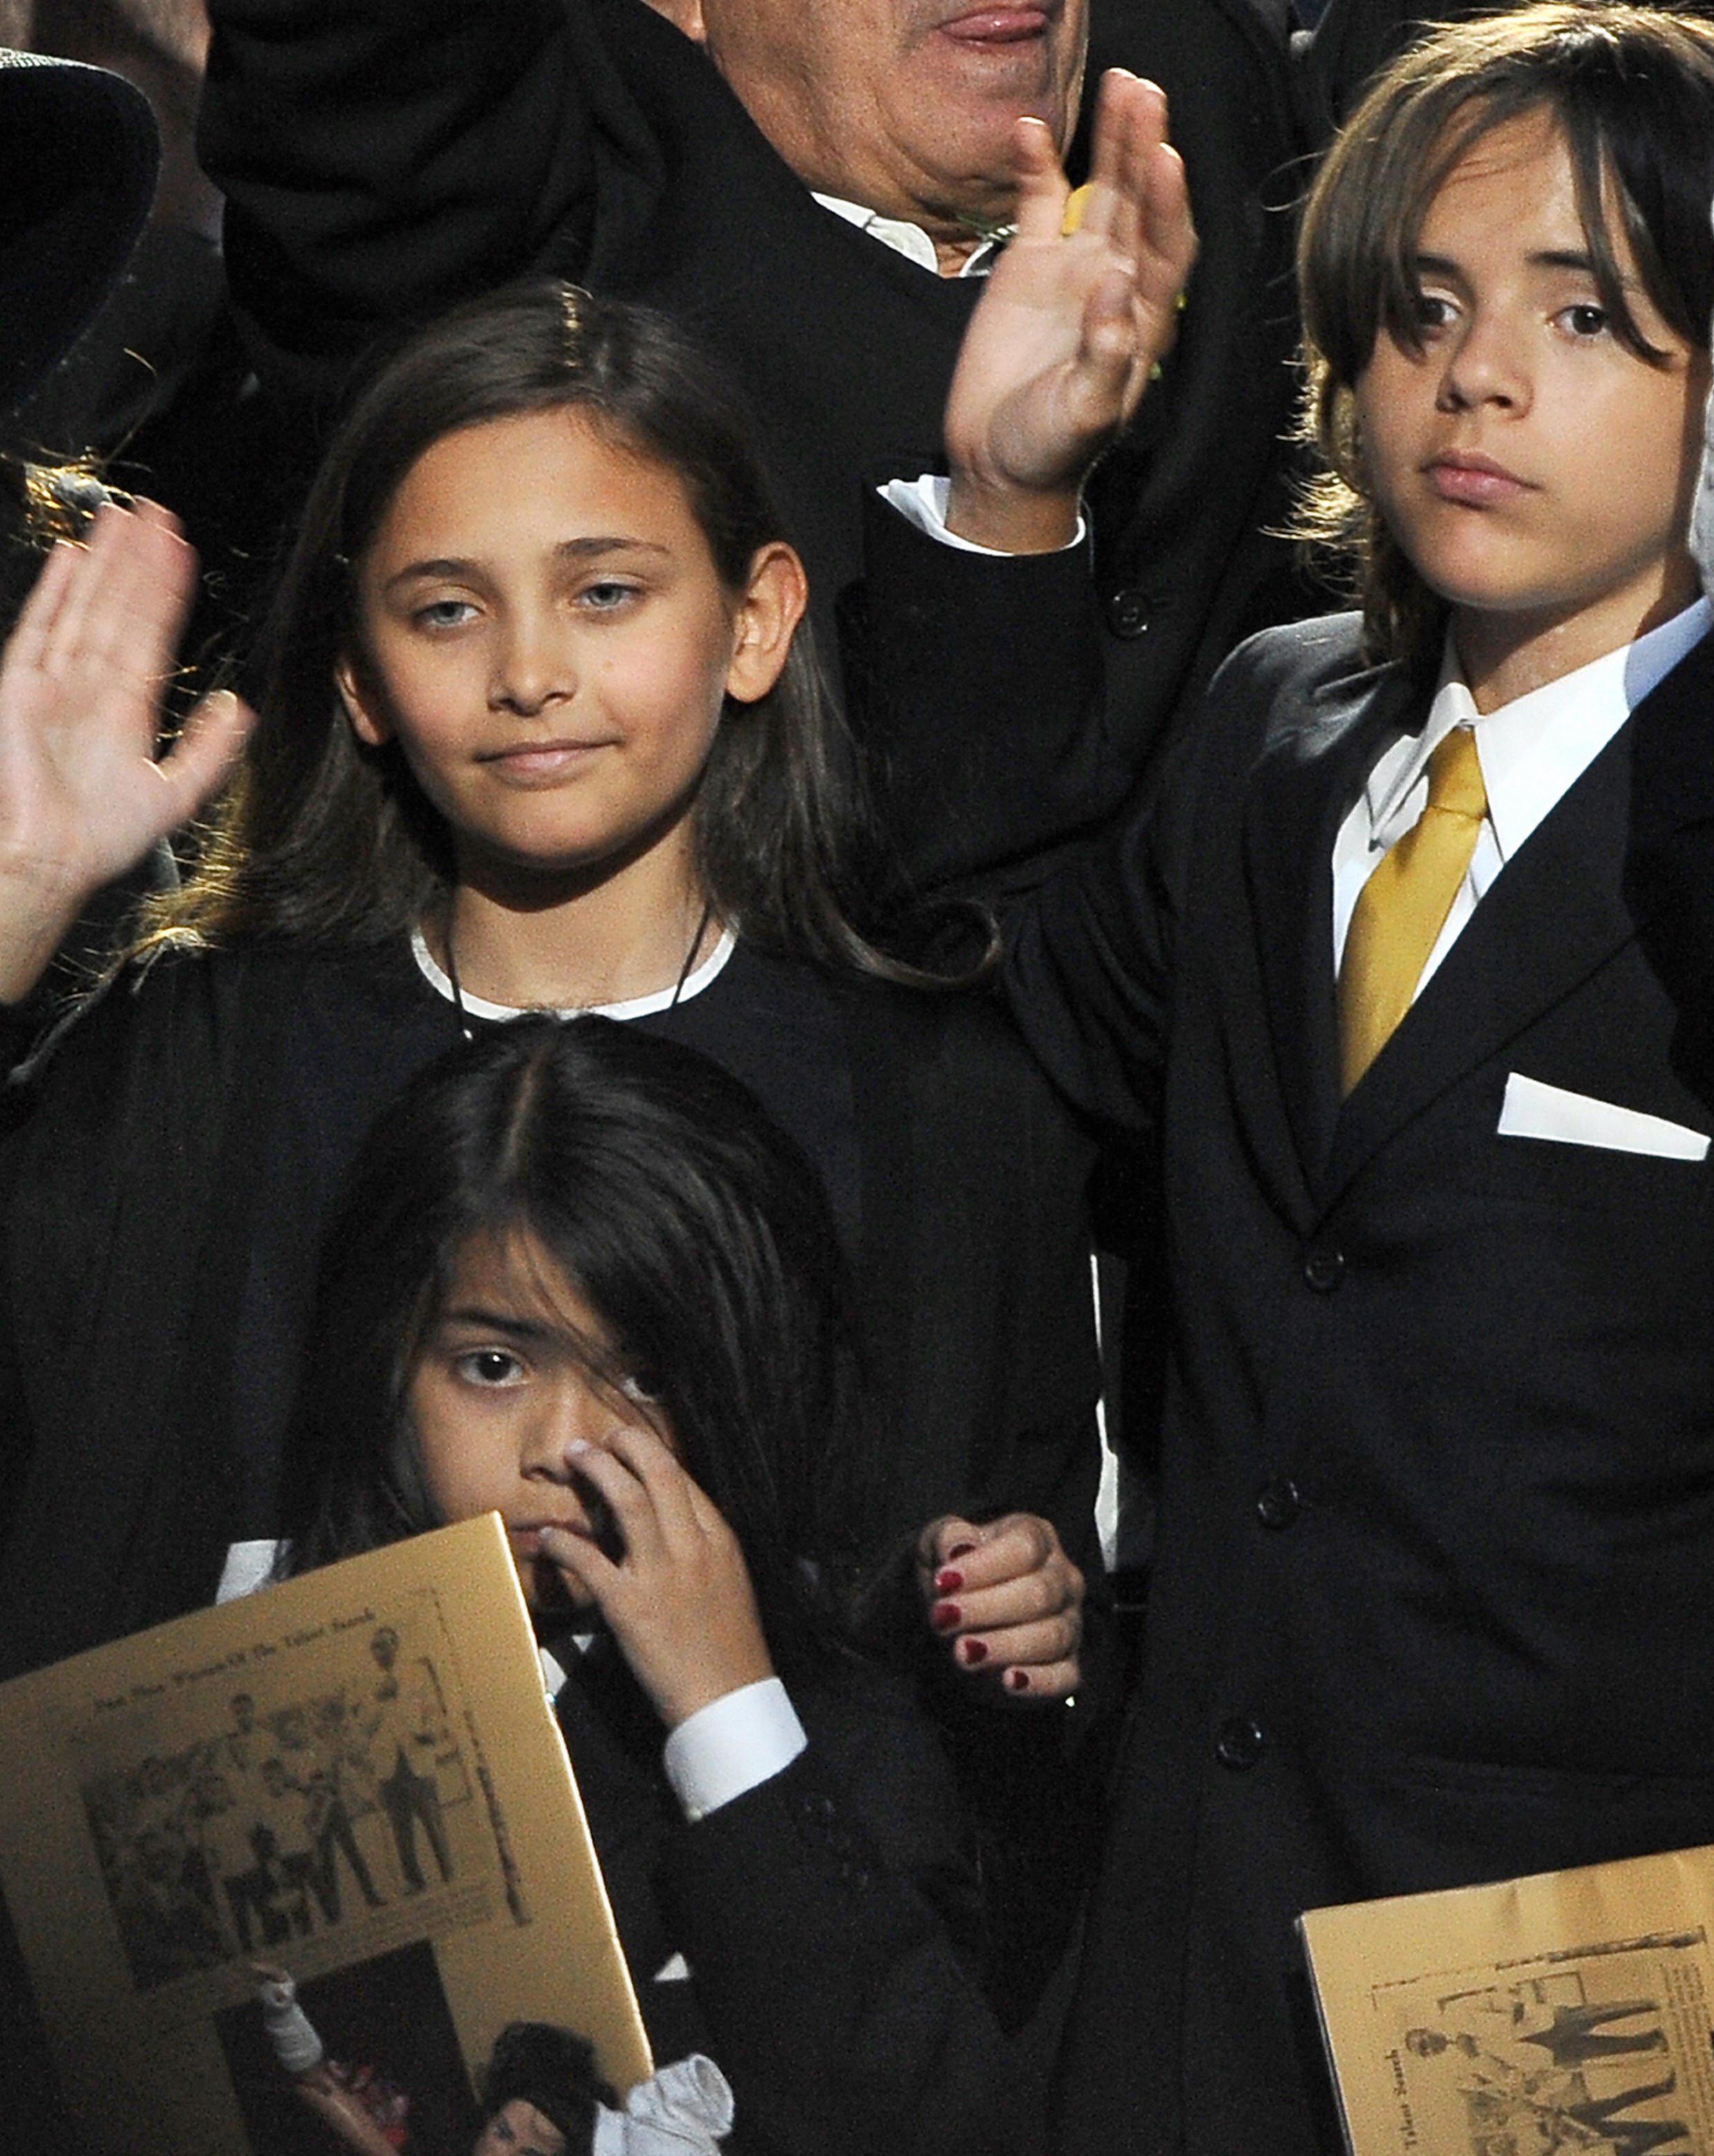 Paris Michael Katherine, Prince Michael II (also known as Blanket), and Prince Michael Jackson I at the memorial service for their father, Michael Jackson, at the Staples Center in Los Angeles on July 7, 2009 | Source: Getty Images